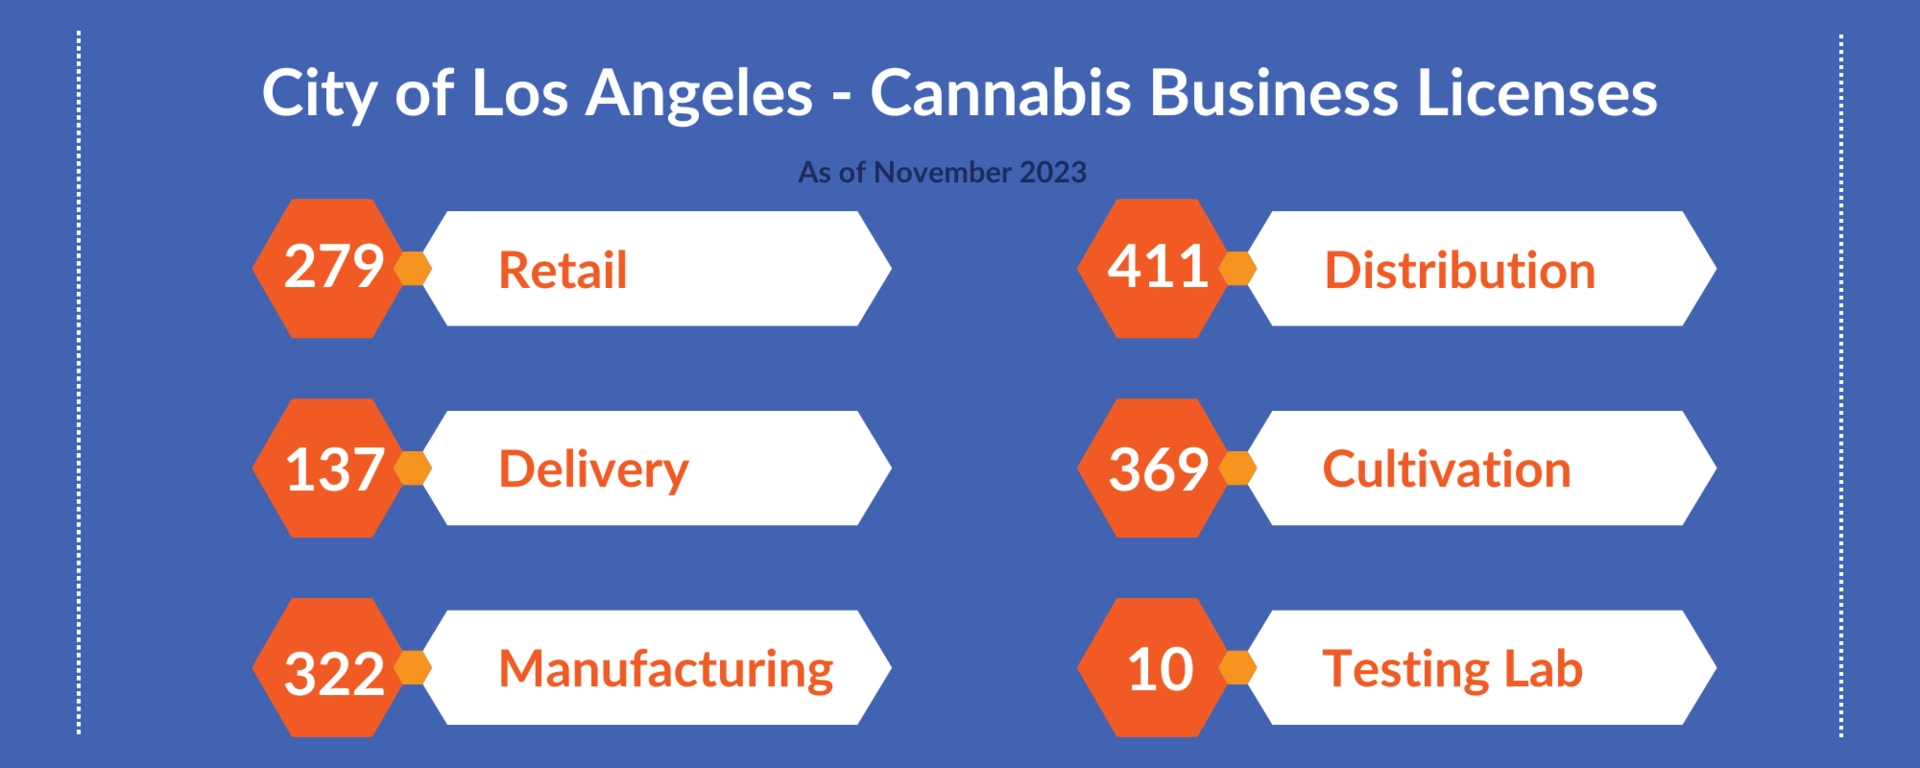 City of Los Angeles - Cannabis Business Licenses: Retail - 279, Distribution - 411, Delivery - 137, Cultivation - 369, Manufacturing - 322, Testing Lab - 10